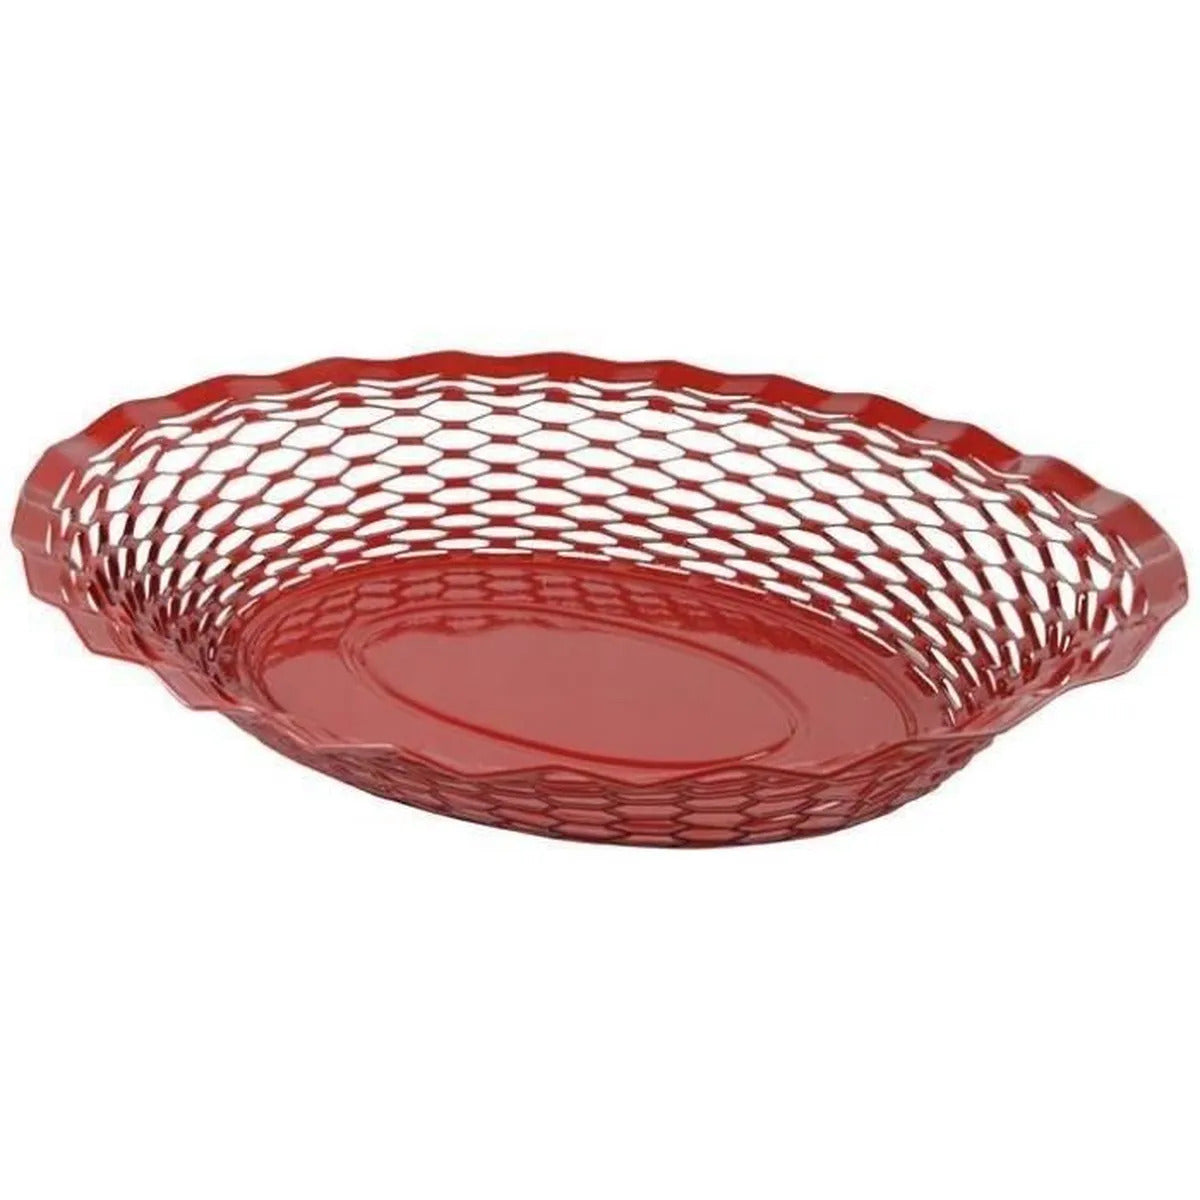 Set of 2 bread baskets - Red - French Address